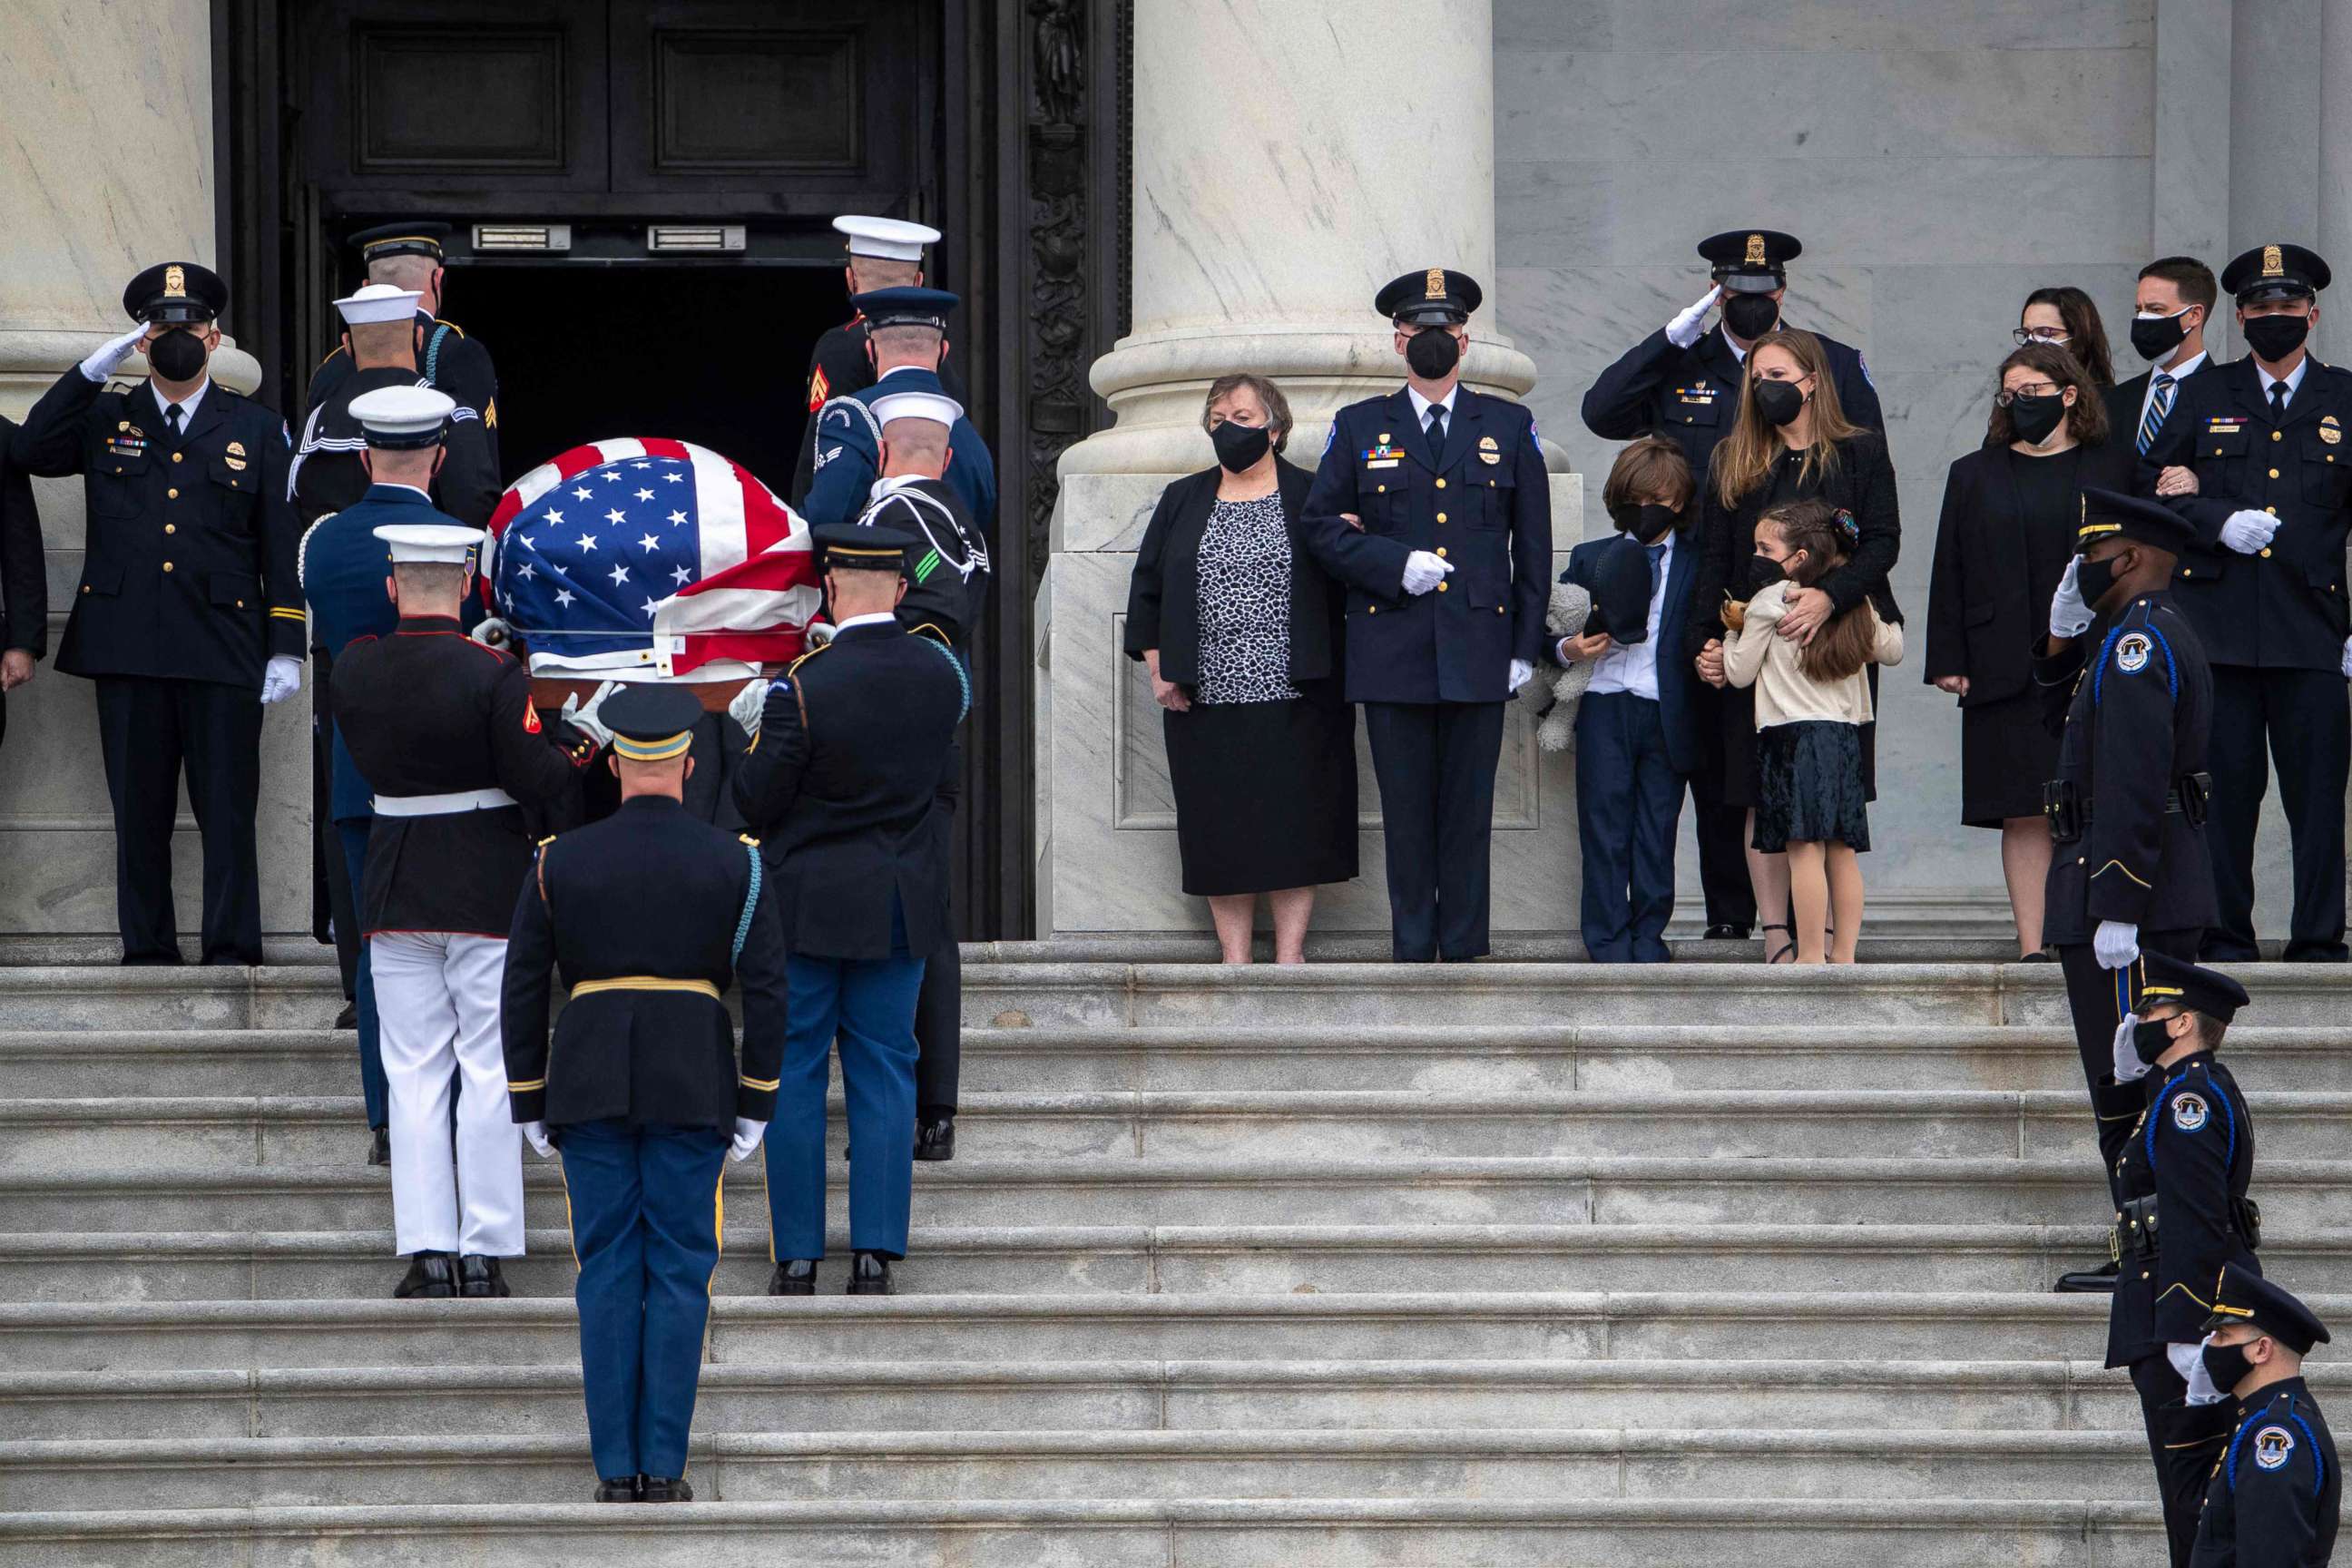 PHOTO: A casket containing the remains of Capitol Police officer William Evans, who was killed in the line of duty on April 2, arrives for a ceremony honoring the officer at the Capitol in Washington, April 13, 2021.